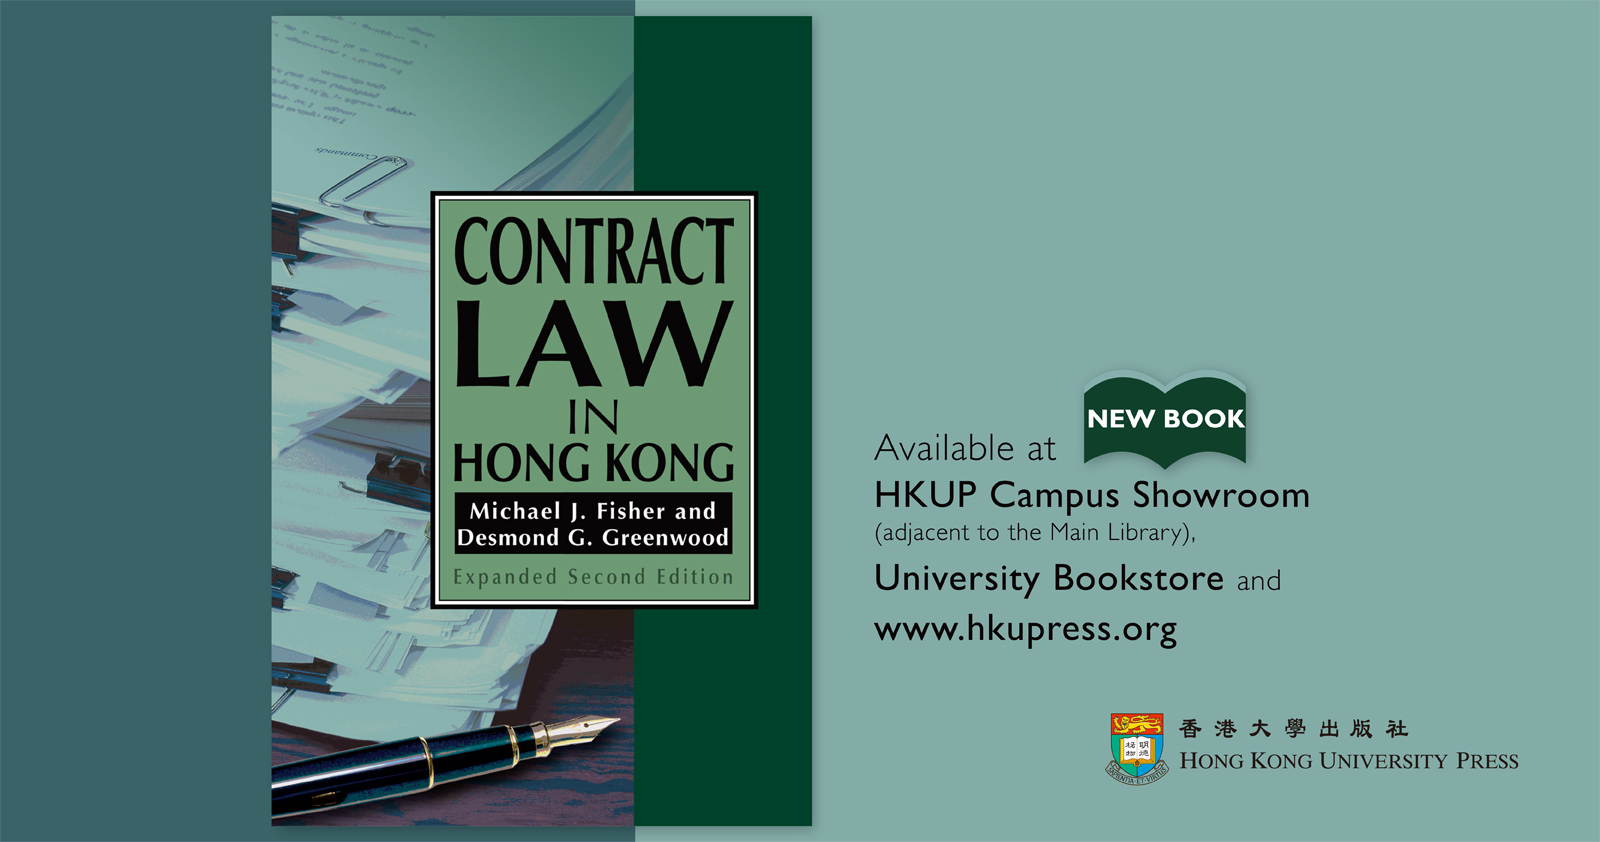 New Book from HKUP